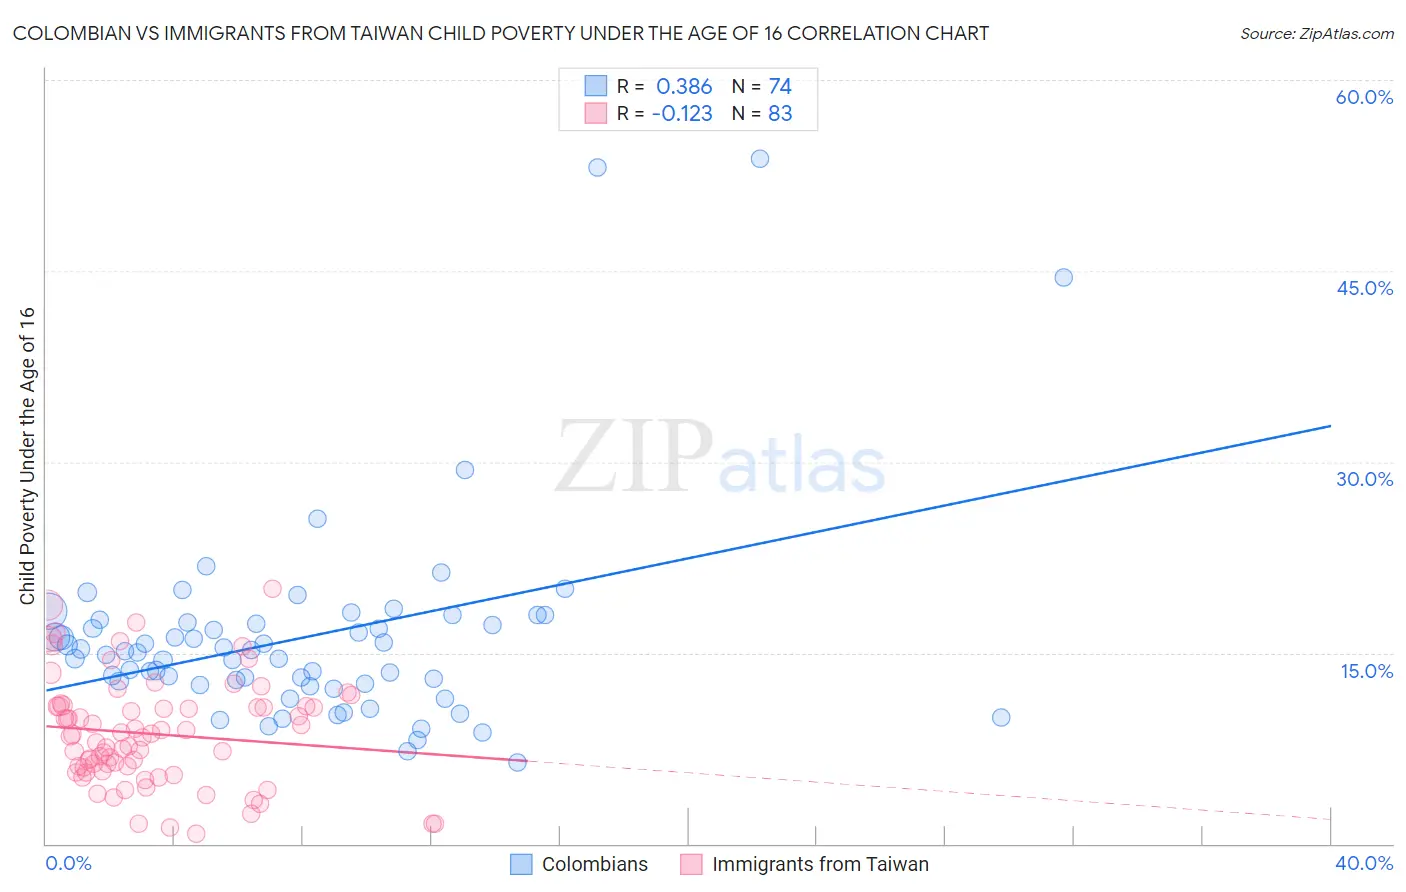 Colombian vs Immigrants from Taiwan Child Poverty Under the Age of 16